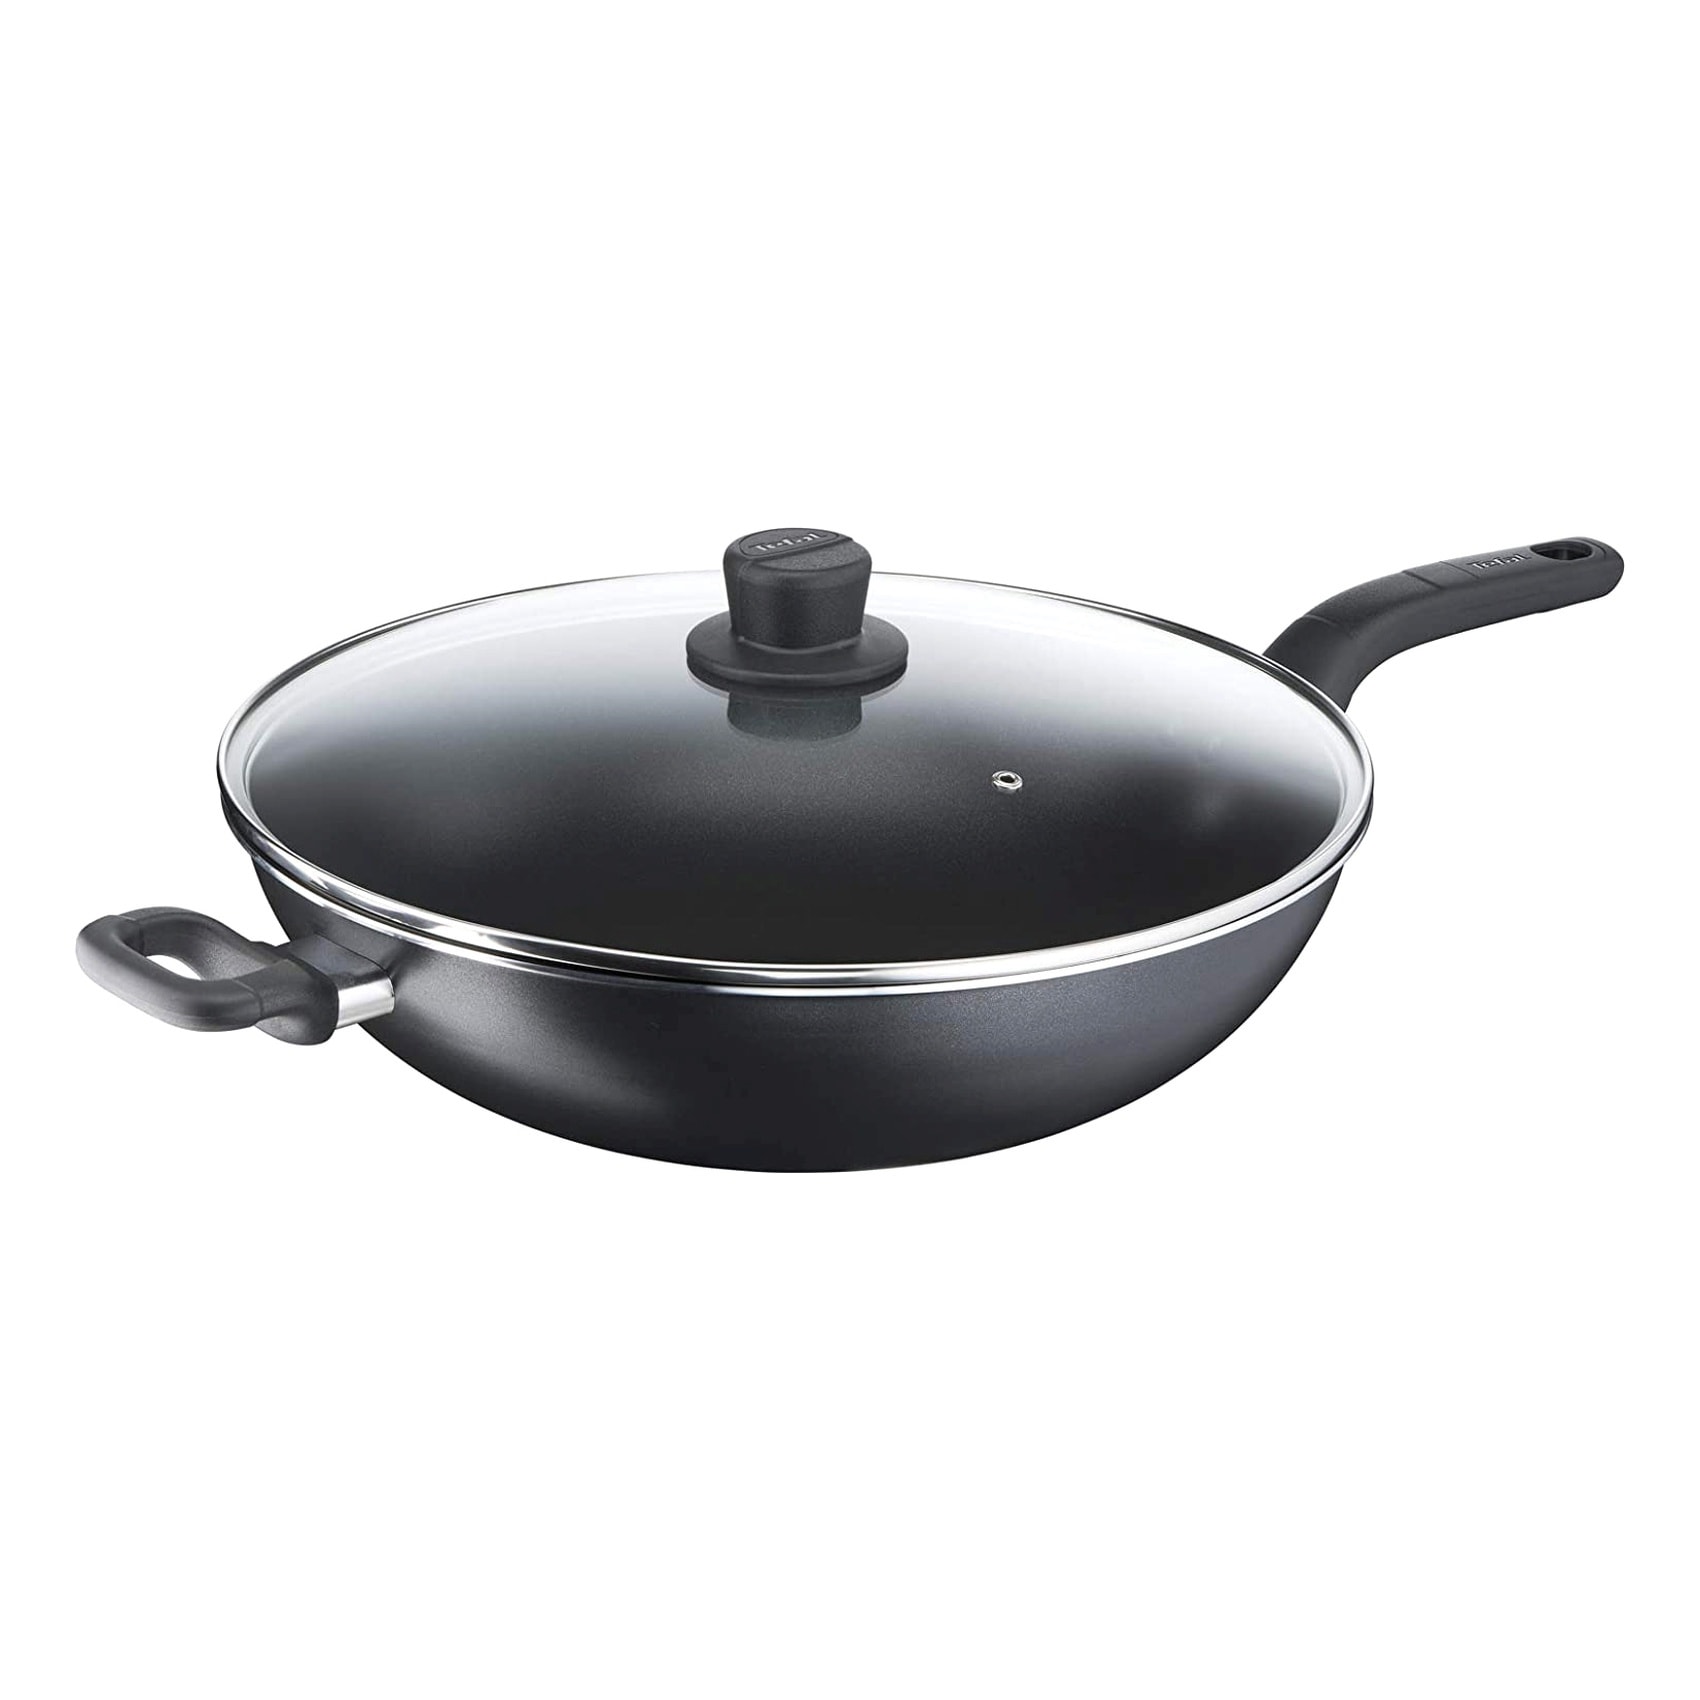 Buy Tefal Cook Easy Non-Stick Aluminium Chinese Wok Pan With Glass Lid  Black 32cm Online - Shop Home & Garden on Carrefour UAE